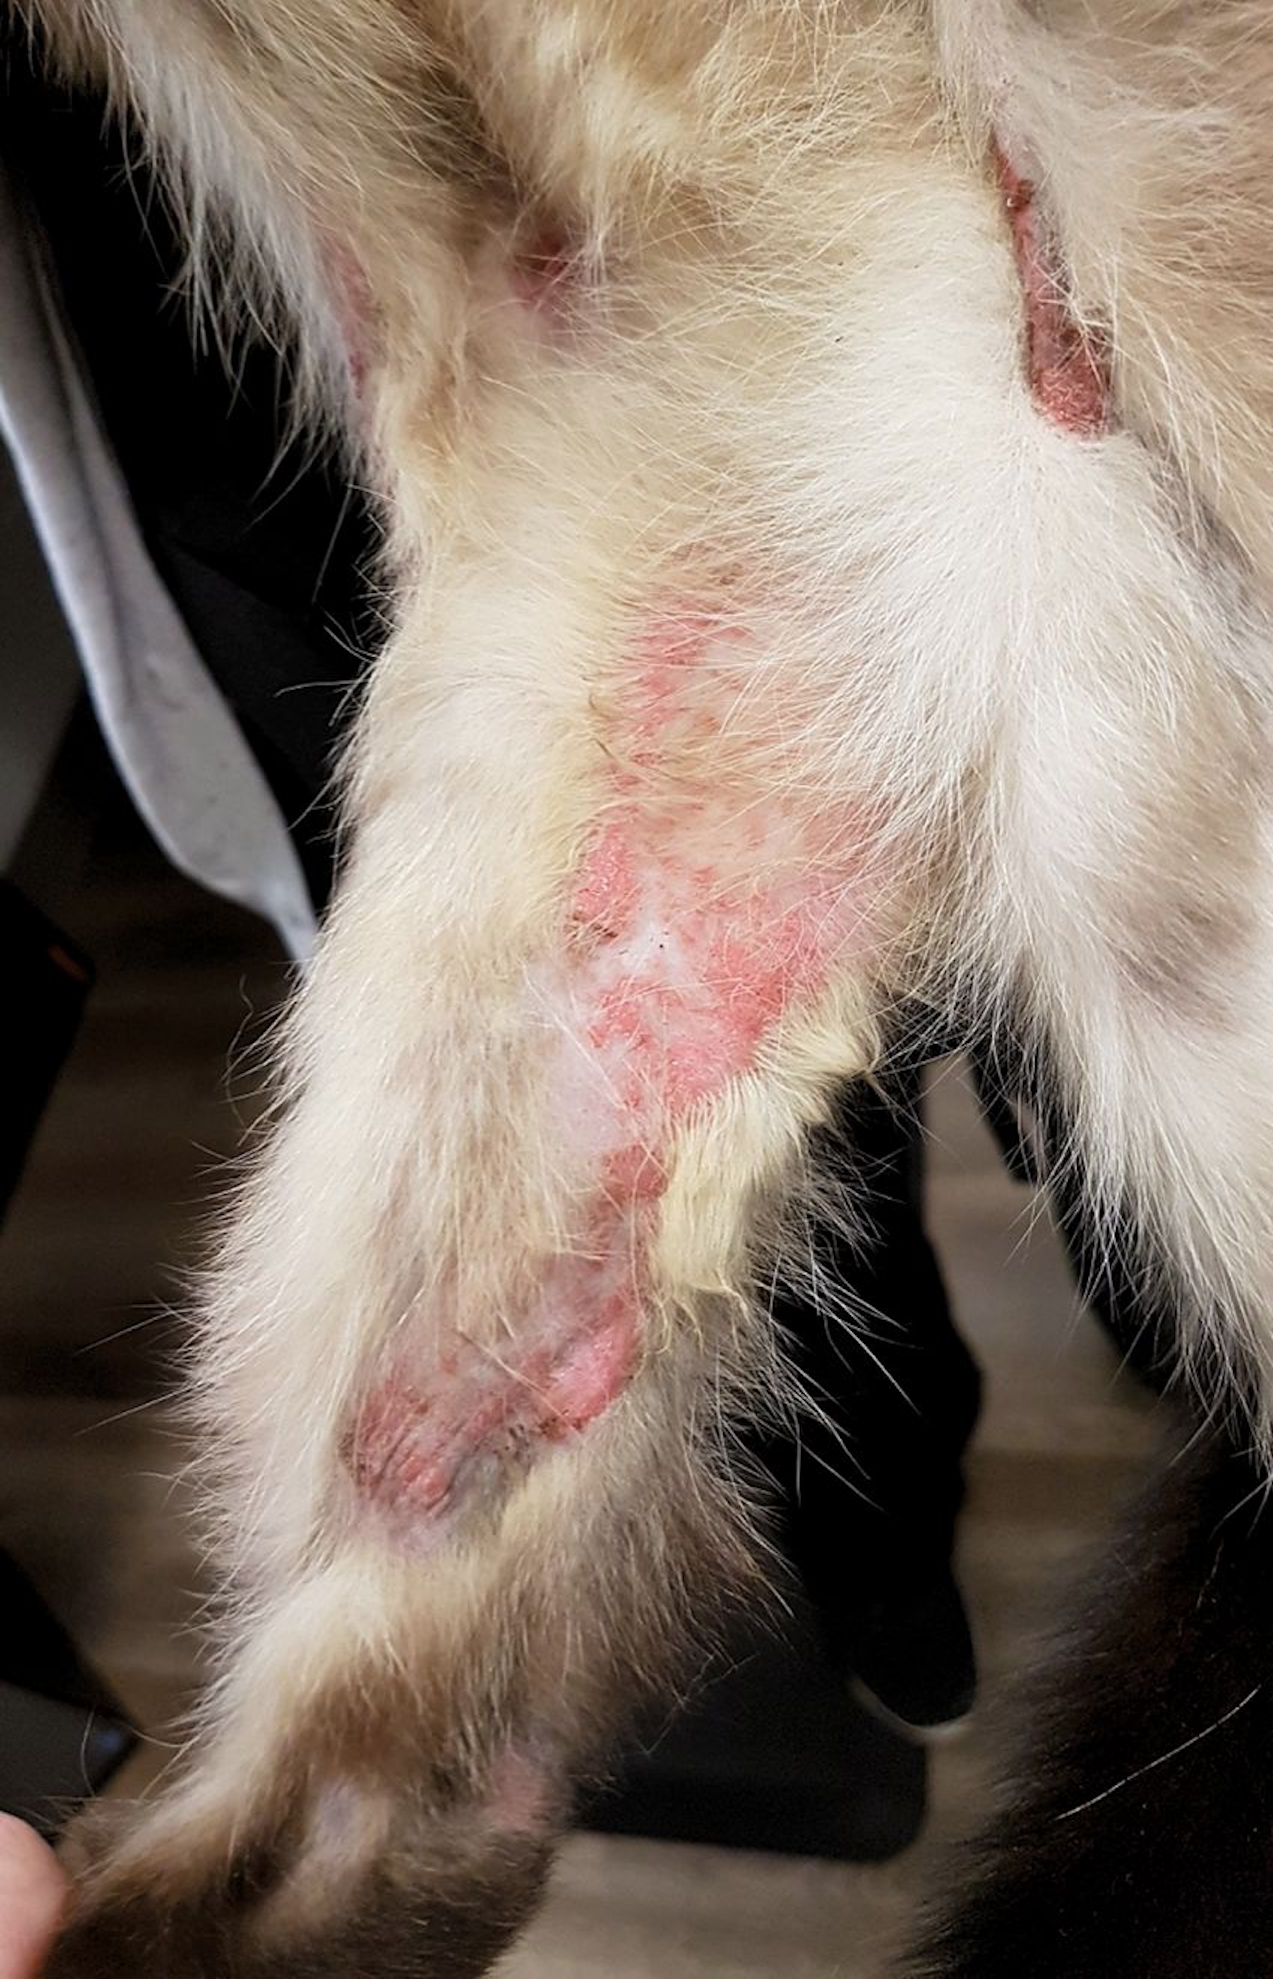 Eosinophilic plaques in a cat, another common presentation of lesions associated with the eosinophilic granuloma complex